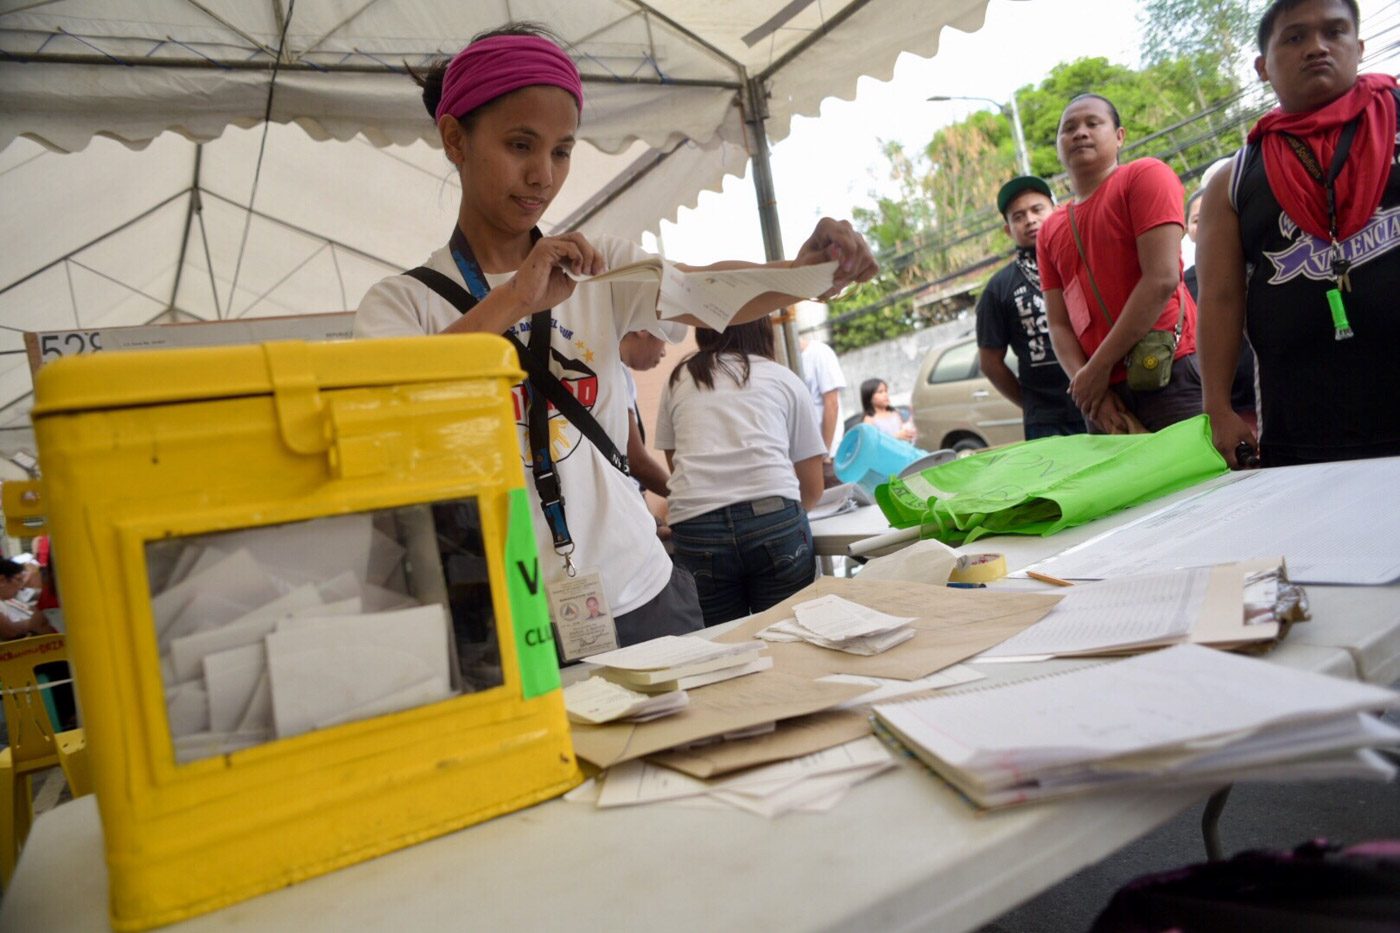 Senate approves on 2nd reading moving barangay, SK polls to 2022